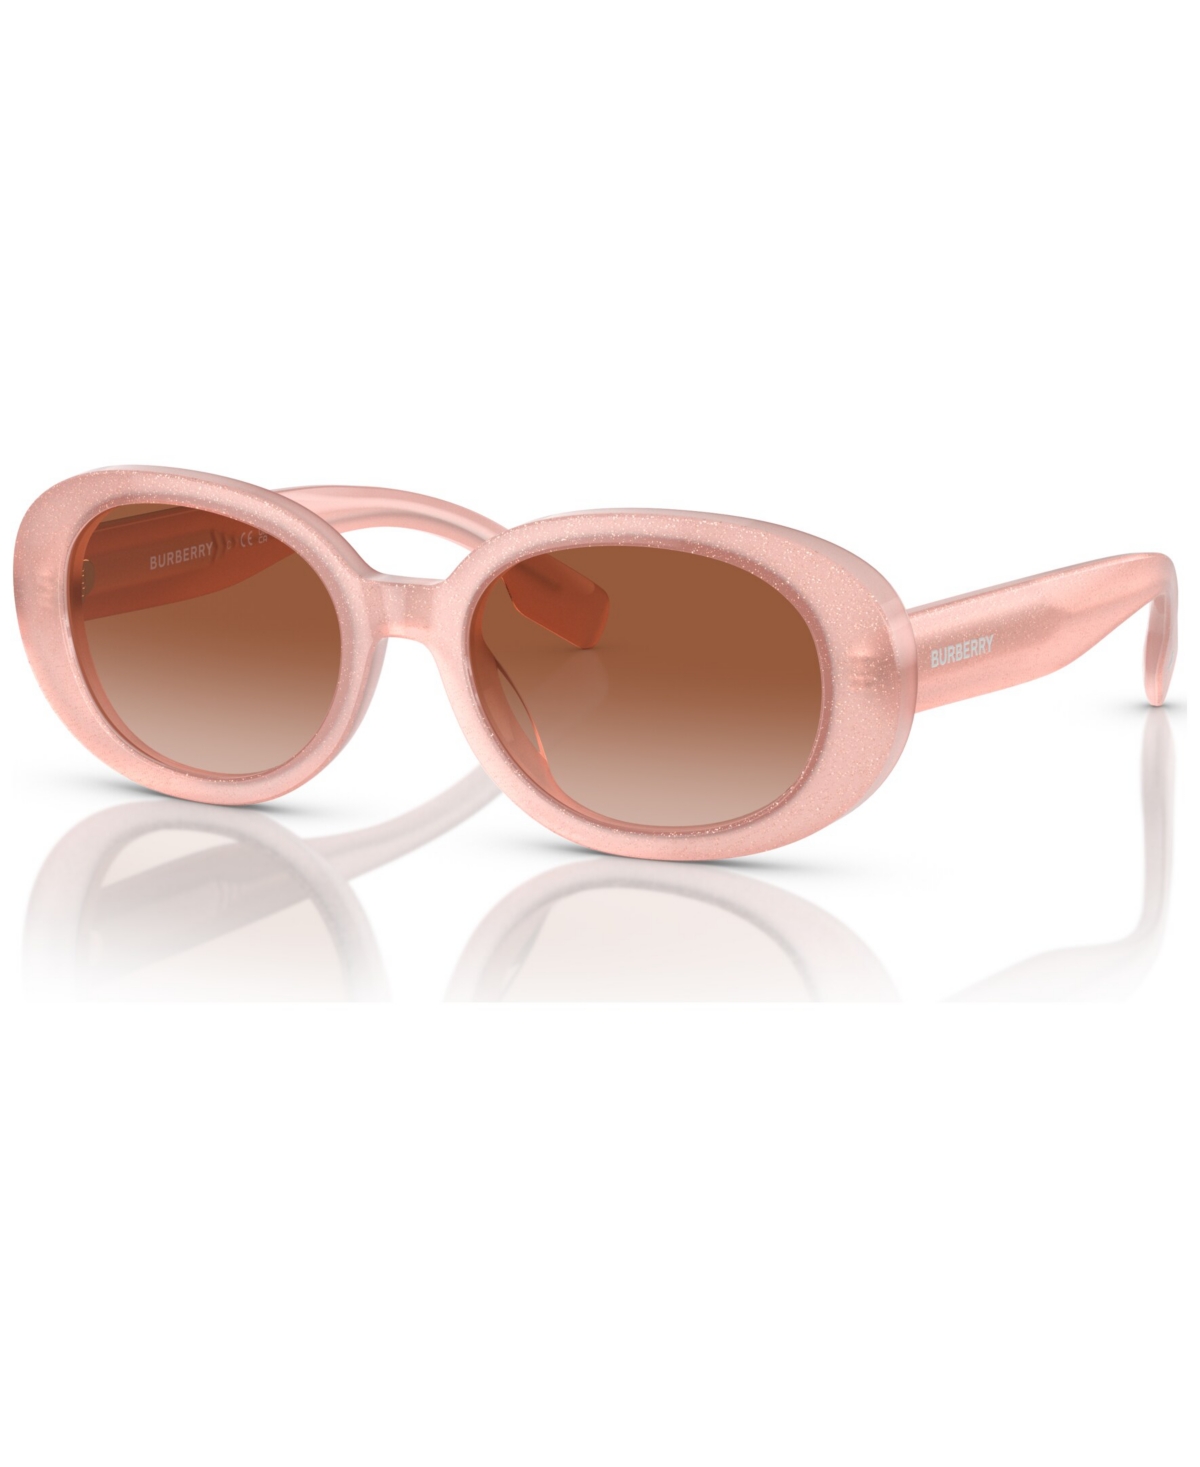 Burberry Kids Sunglasses, Gradient Jb4339 (ages 7-10) In Top Glitter On Opal Pink